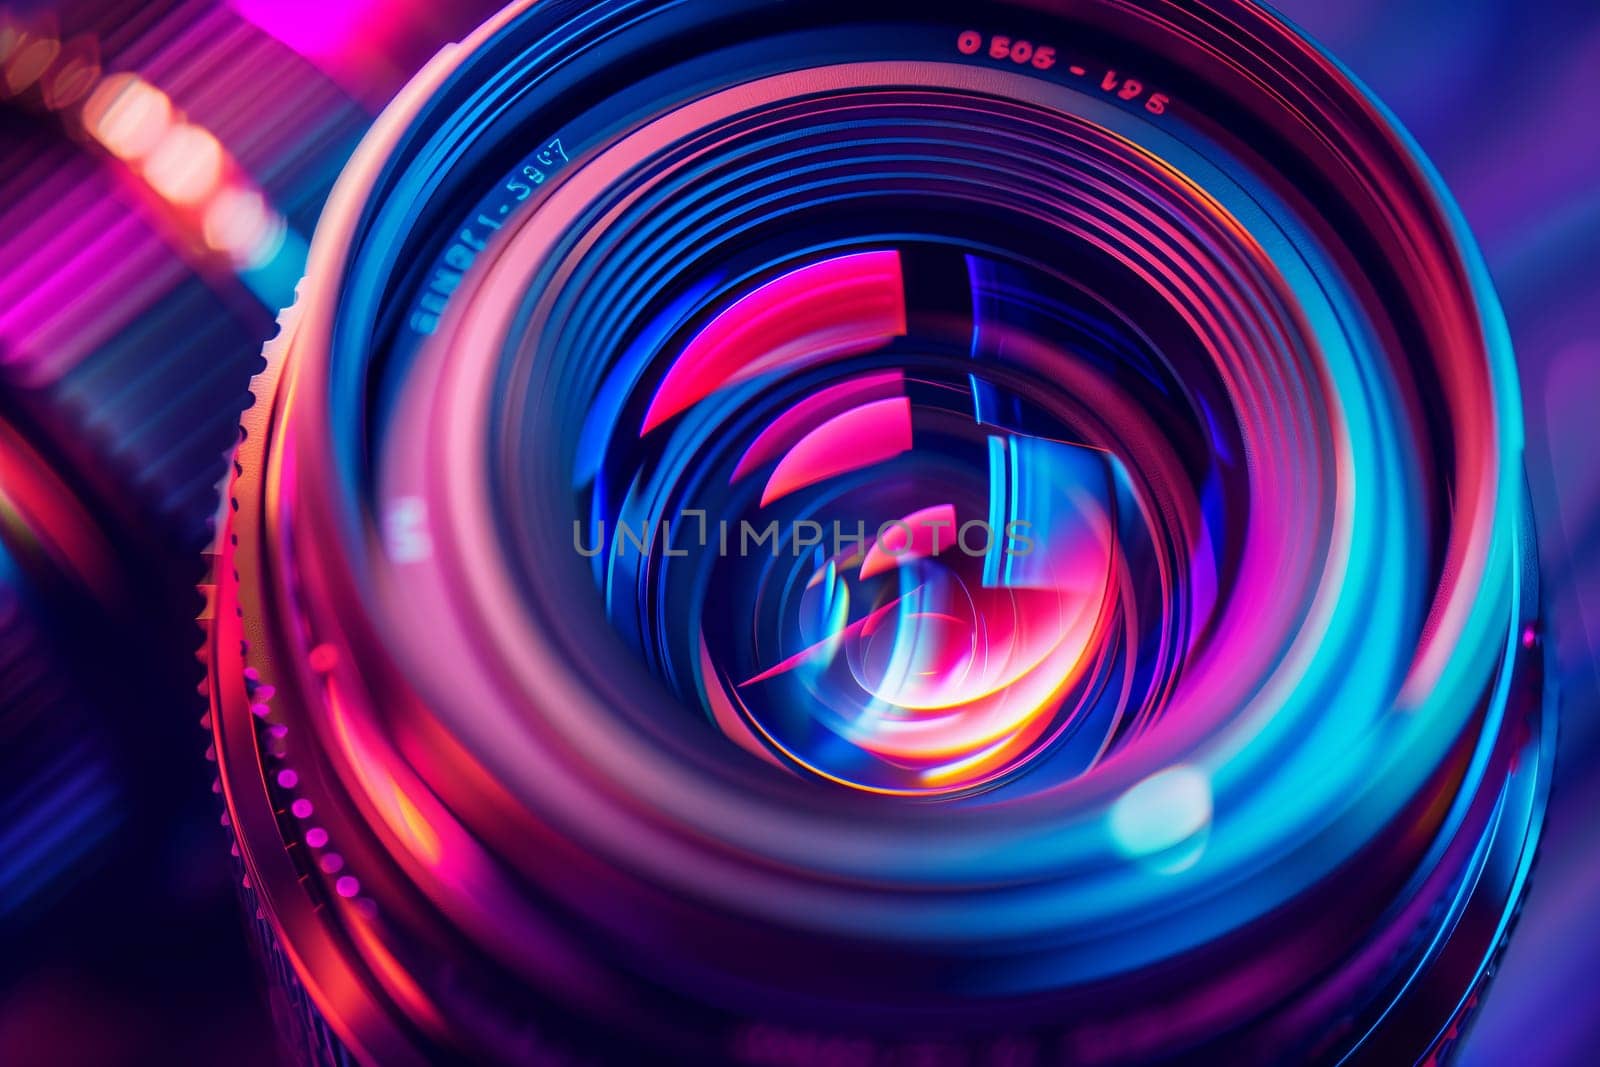 A close up of a camera lens against a colorful background with shades of purple, pink, violet, magenta, and electric blue, resembling a swirling liquid or gas in a circular pattern